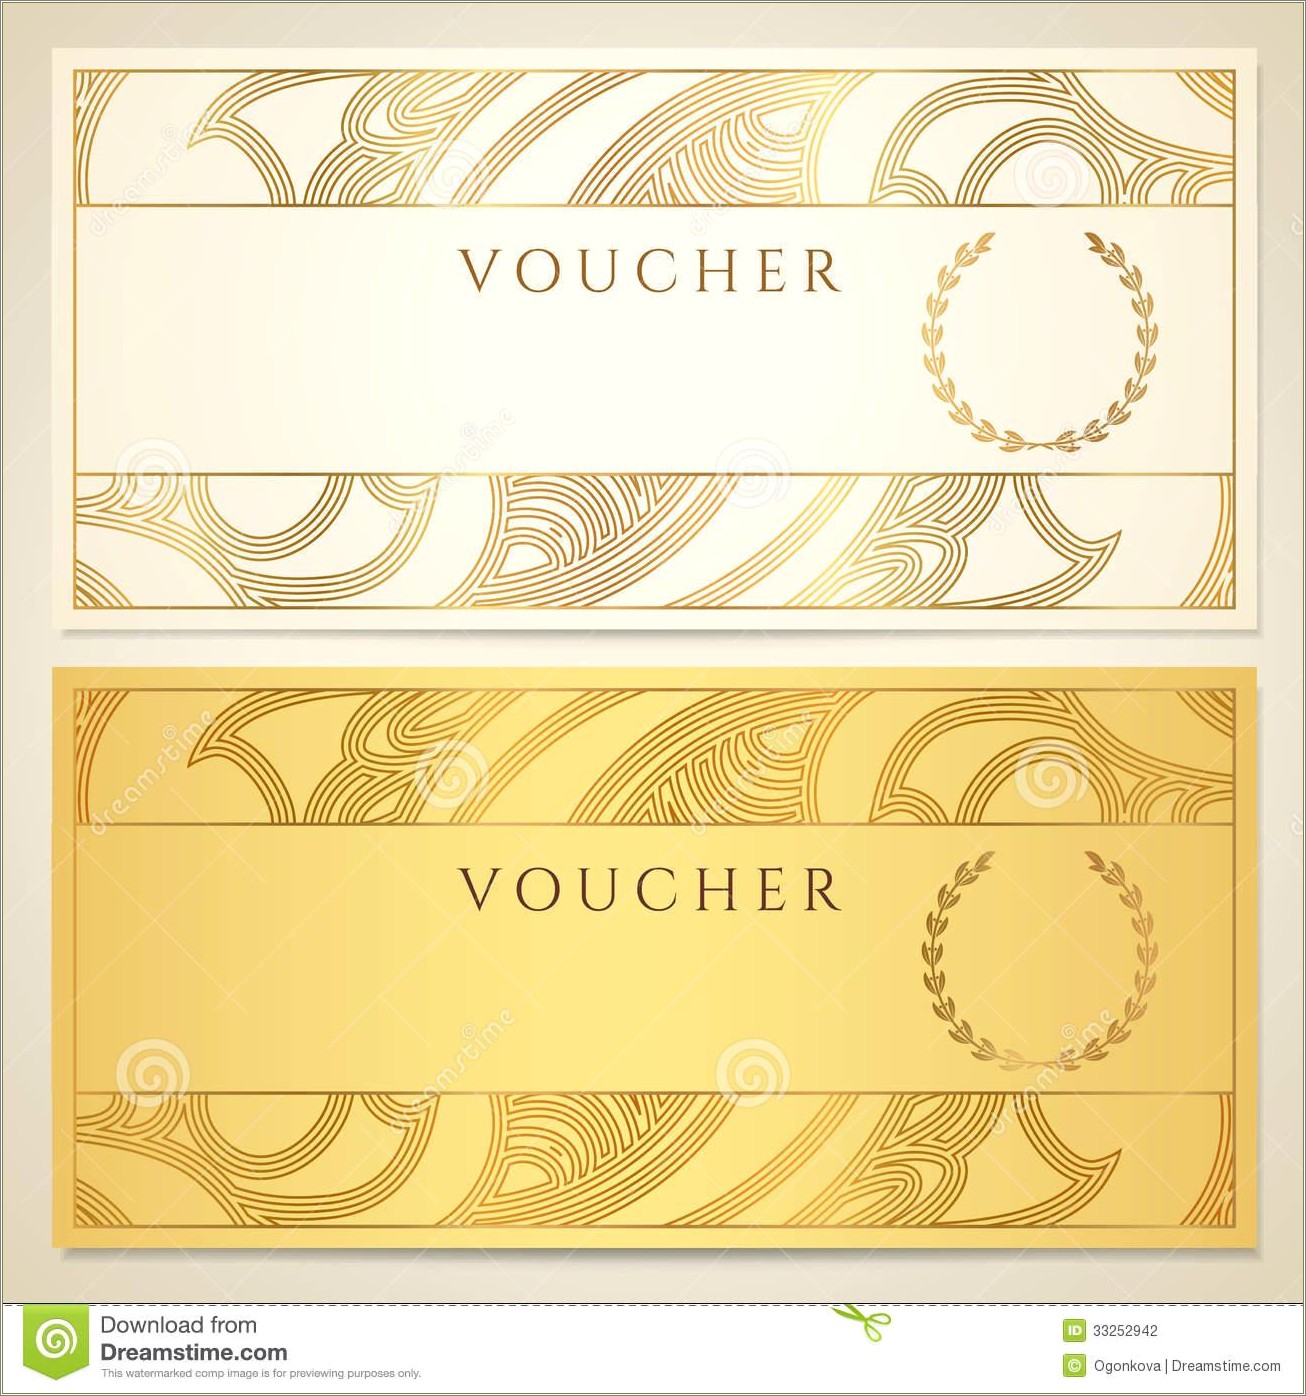 Free 2 Up Gift Certificate Template Eps